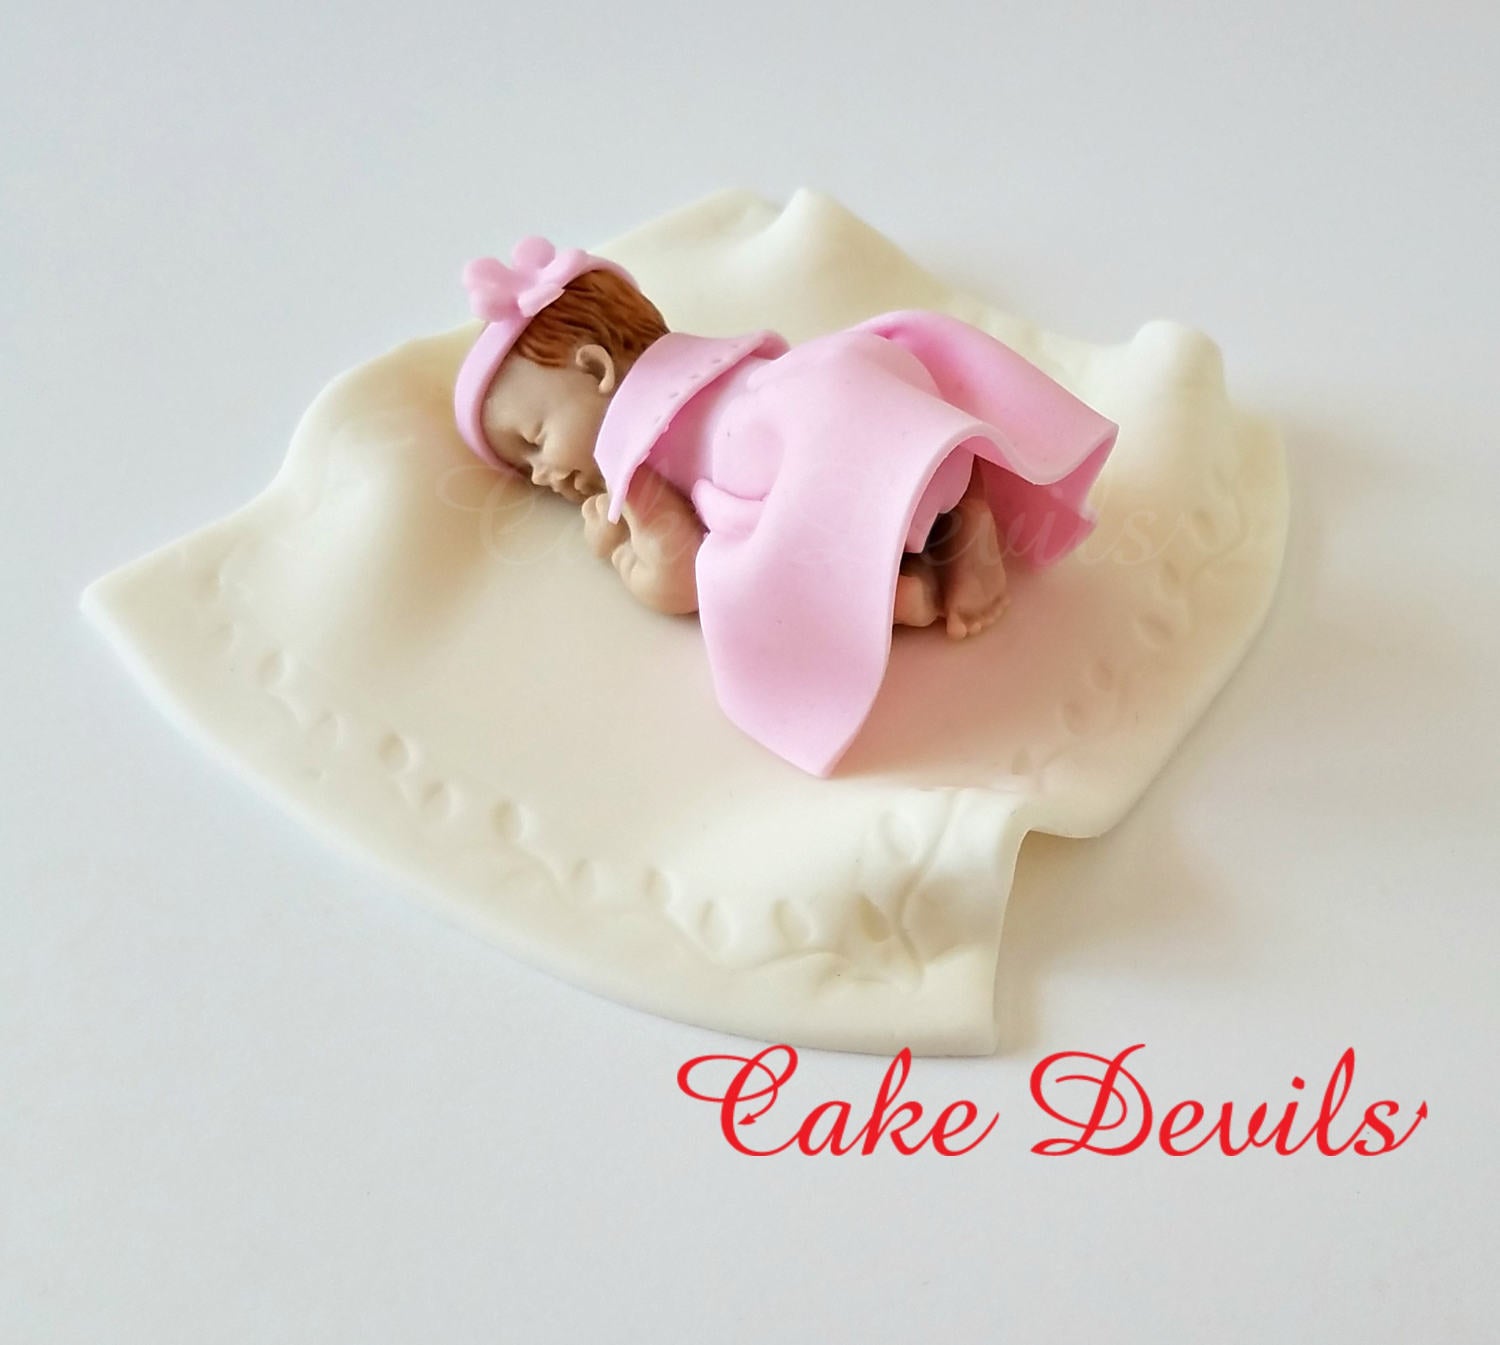 christening cake topper baby shower baby cloths edible personalised decoration